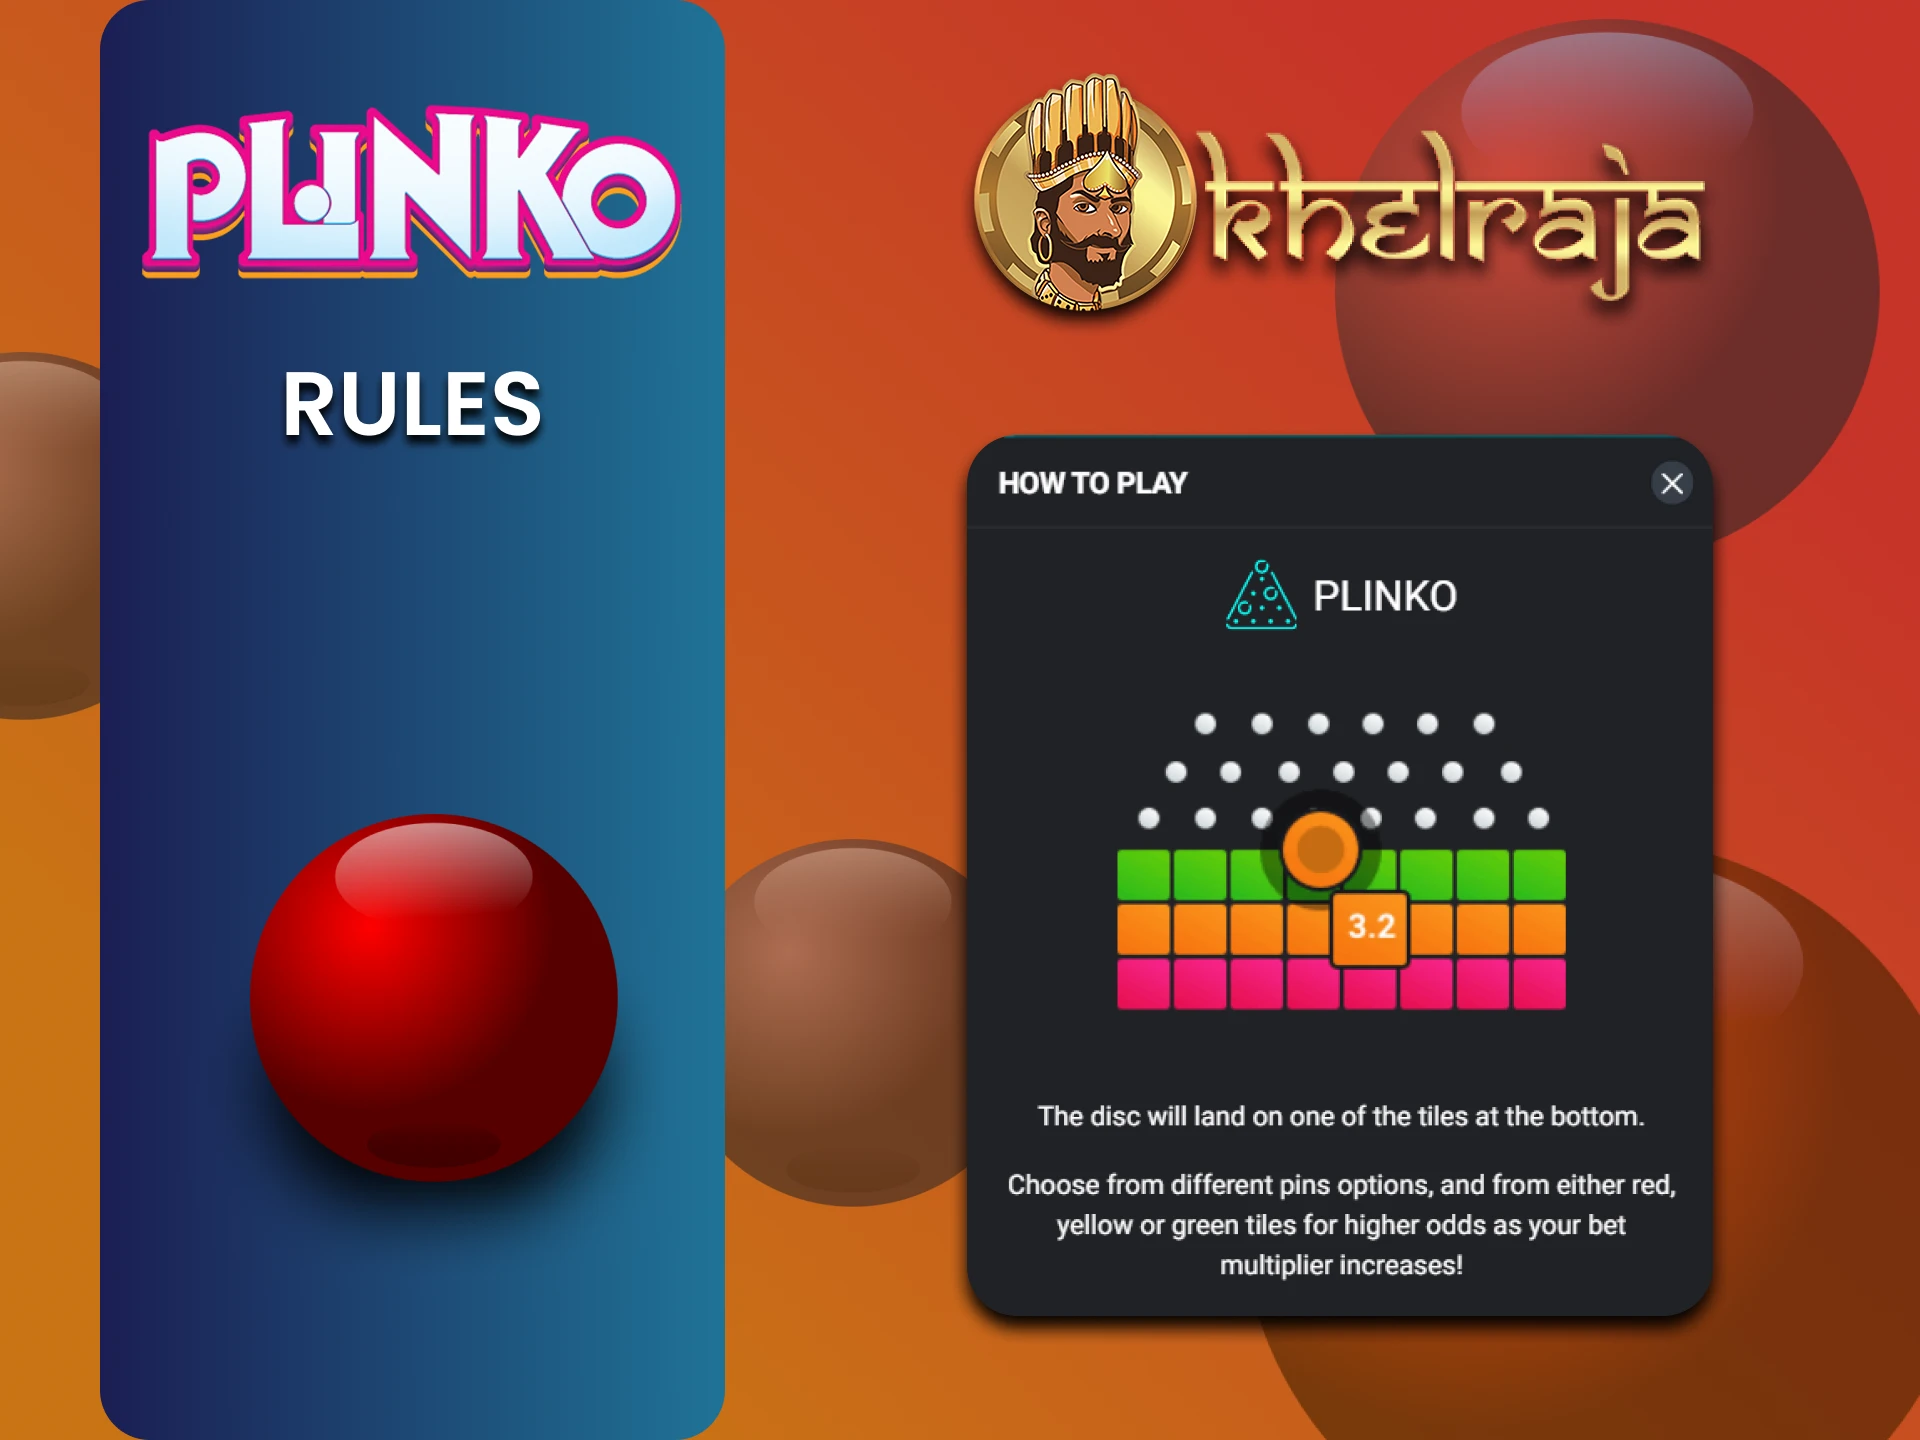 We will tell you the rules of playing Plinko on Khelraja.